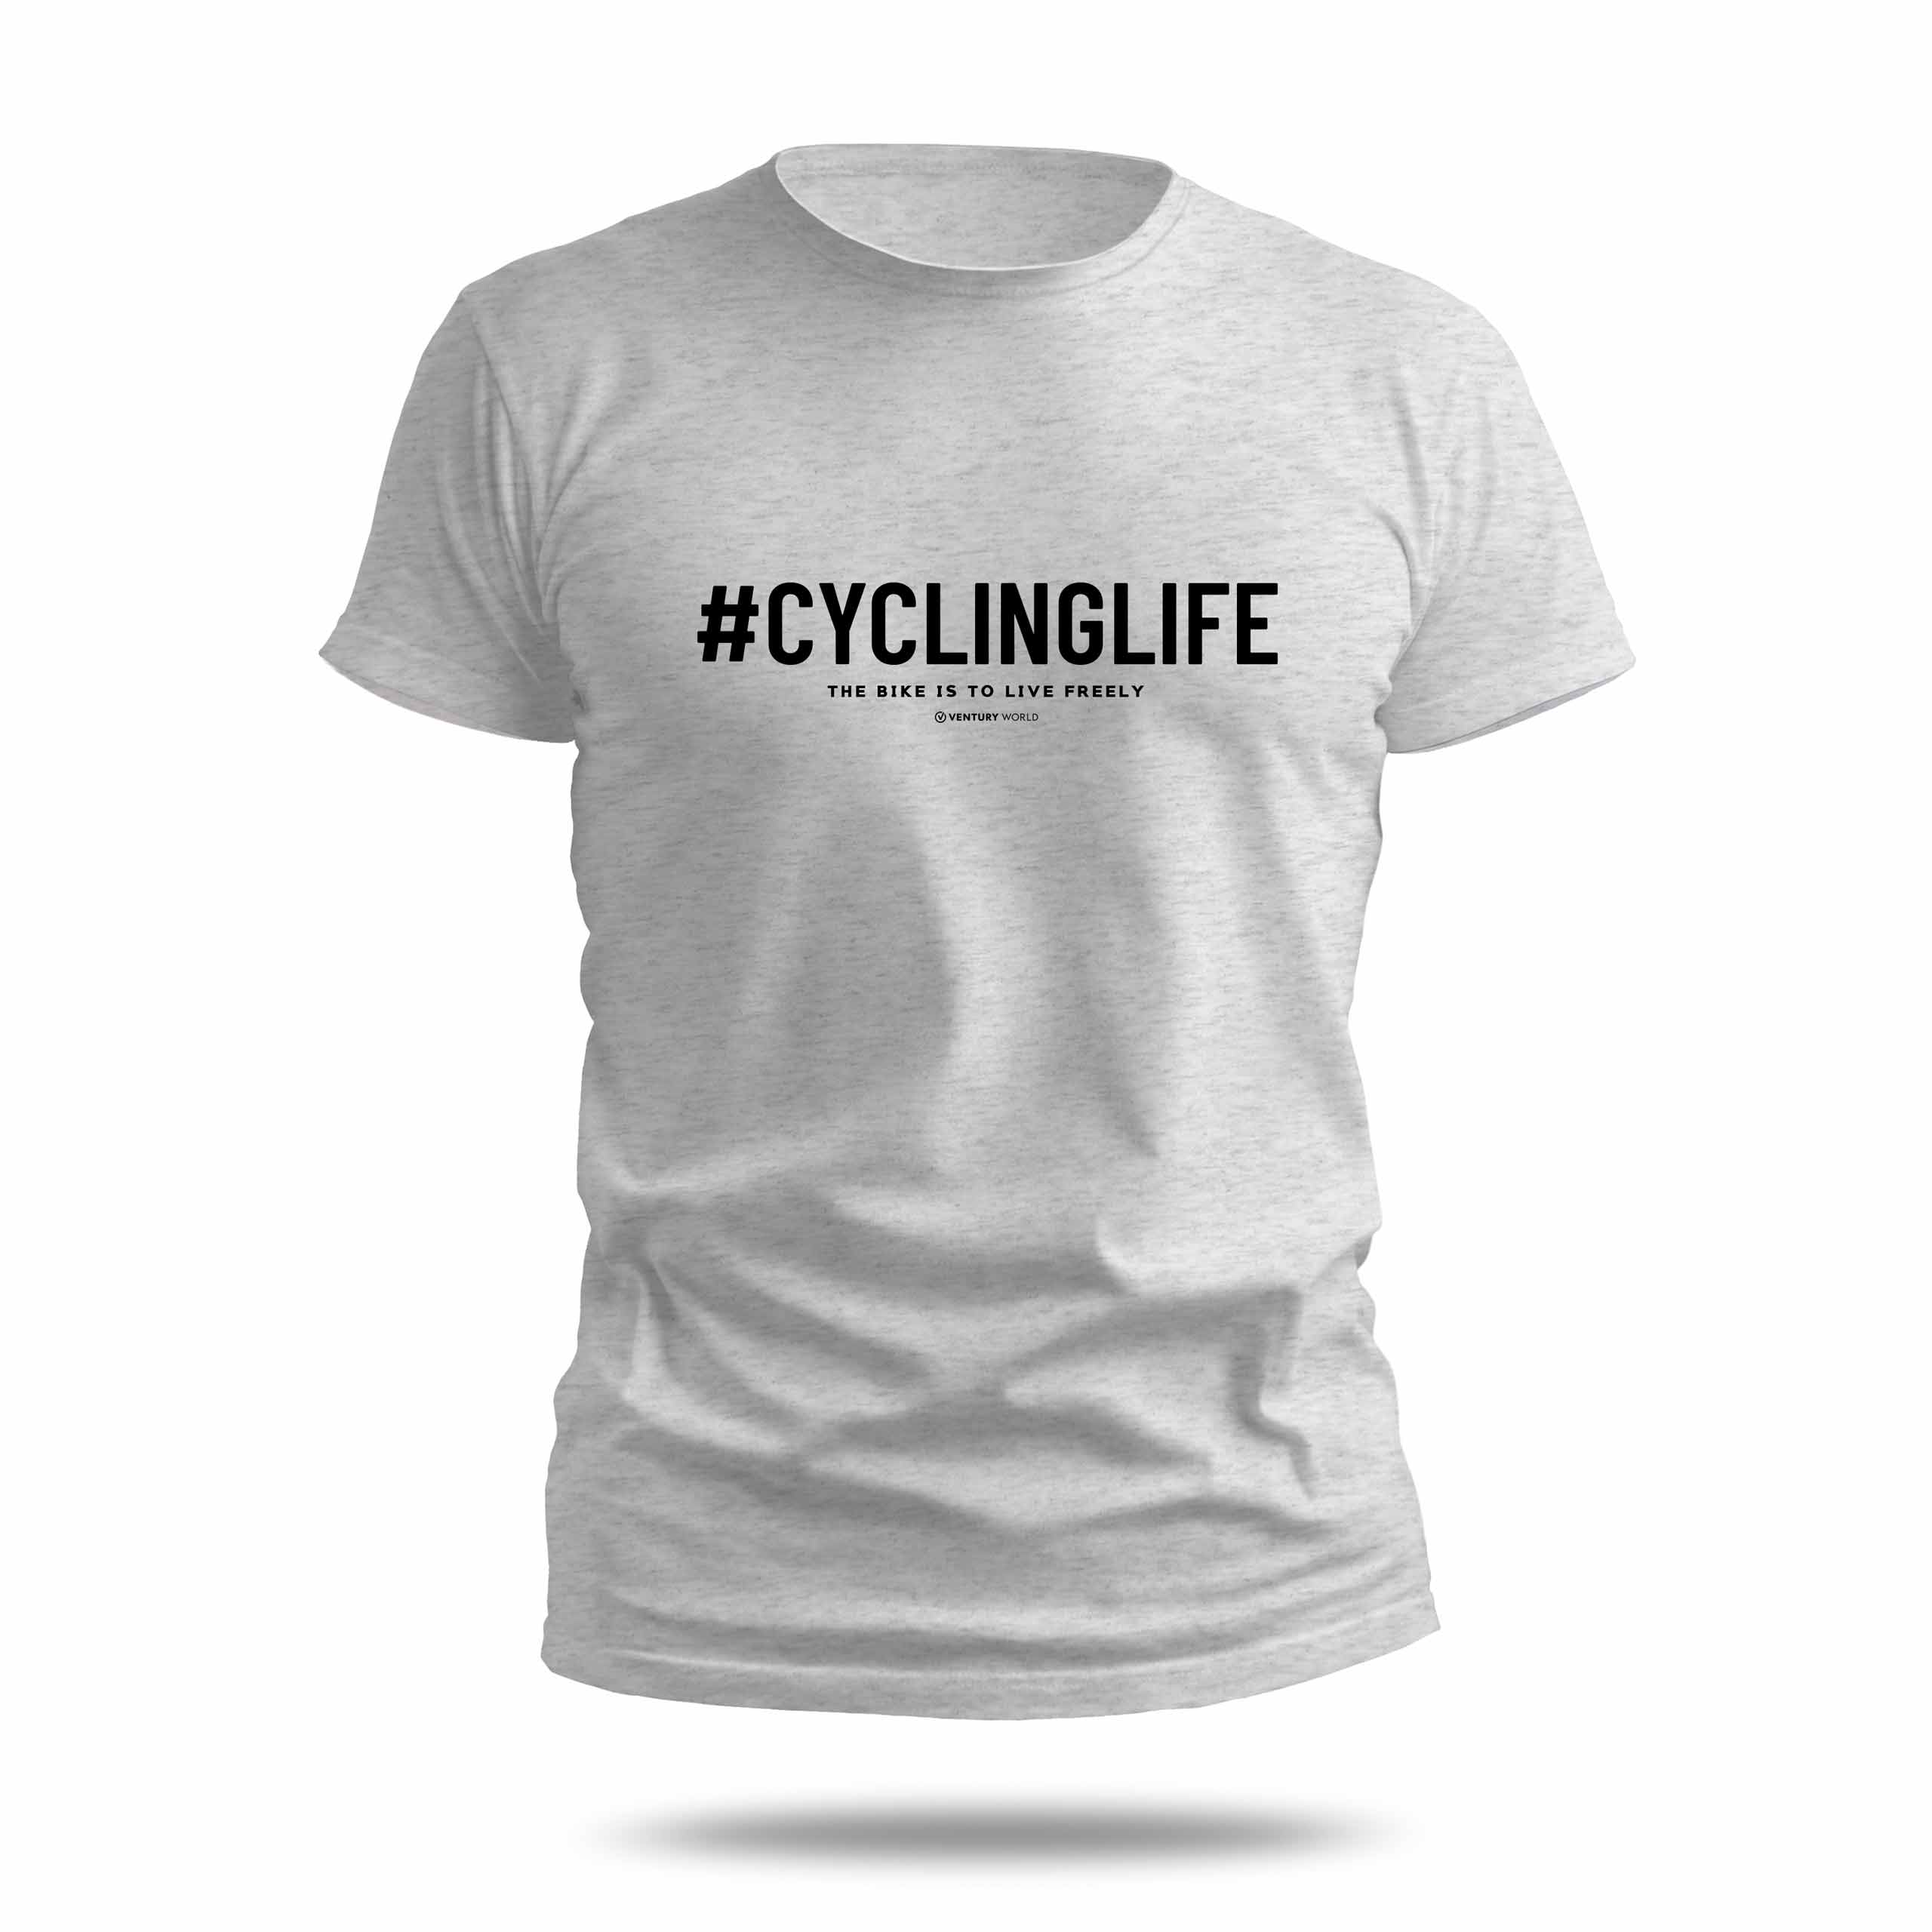 Cycling t-shirt - Ride Freely - Courage and tenacity... is to live freely - Live Freely cycling collection - Basic medium fit 100% natural round neck t-shirt.